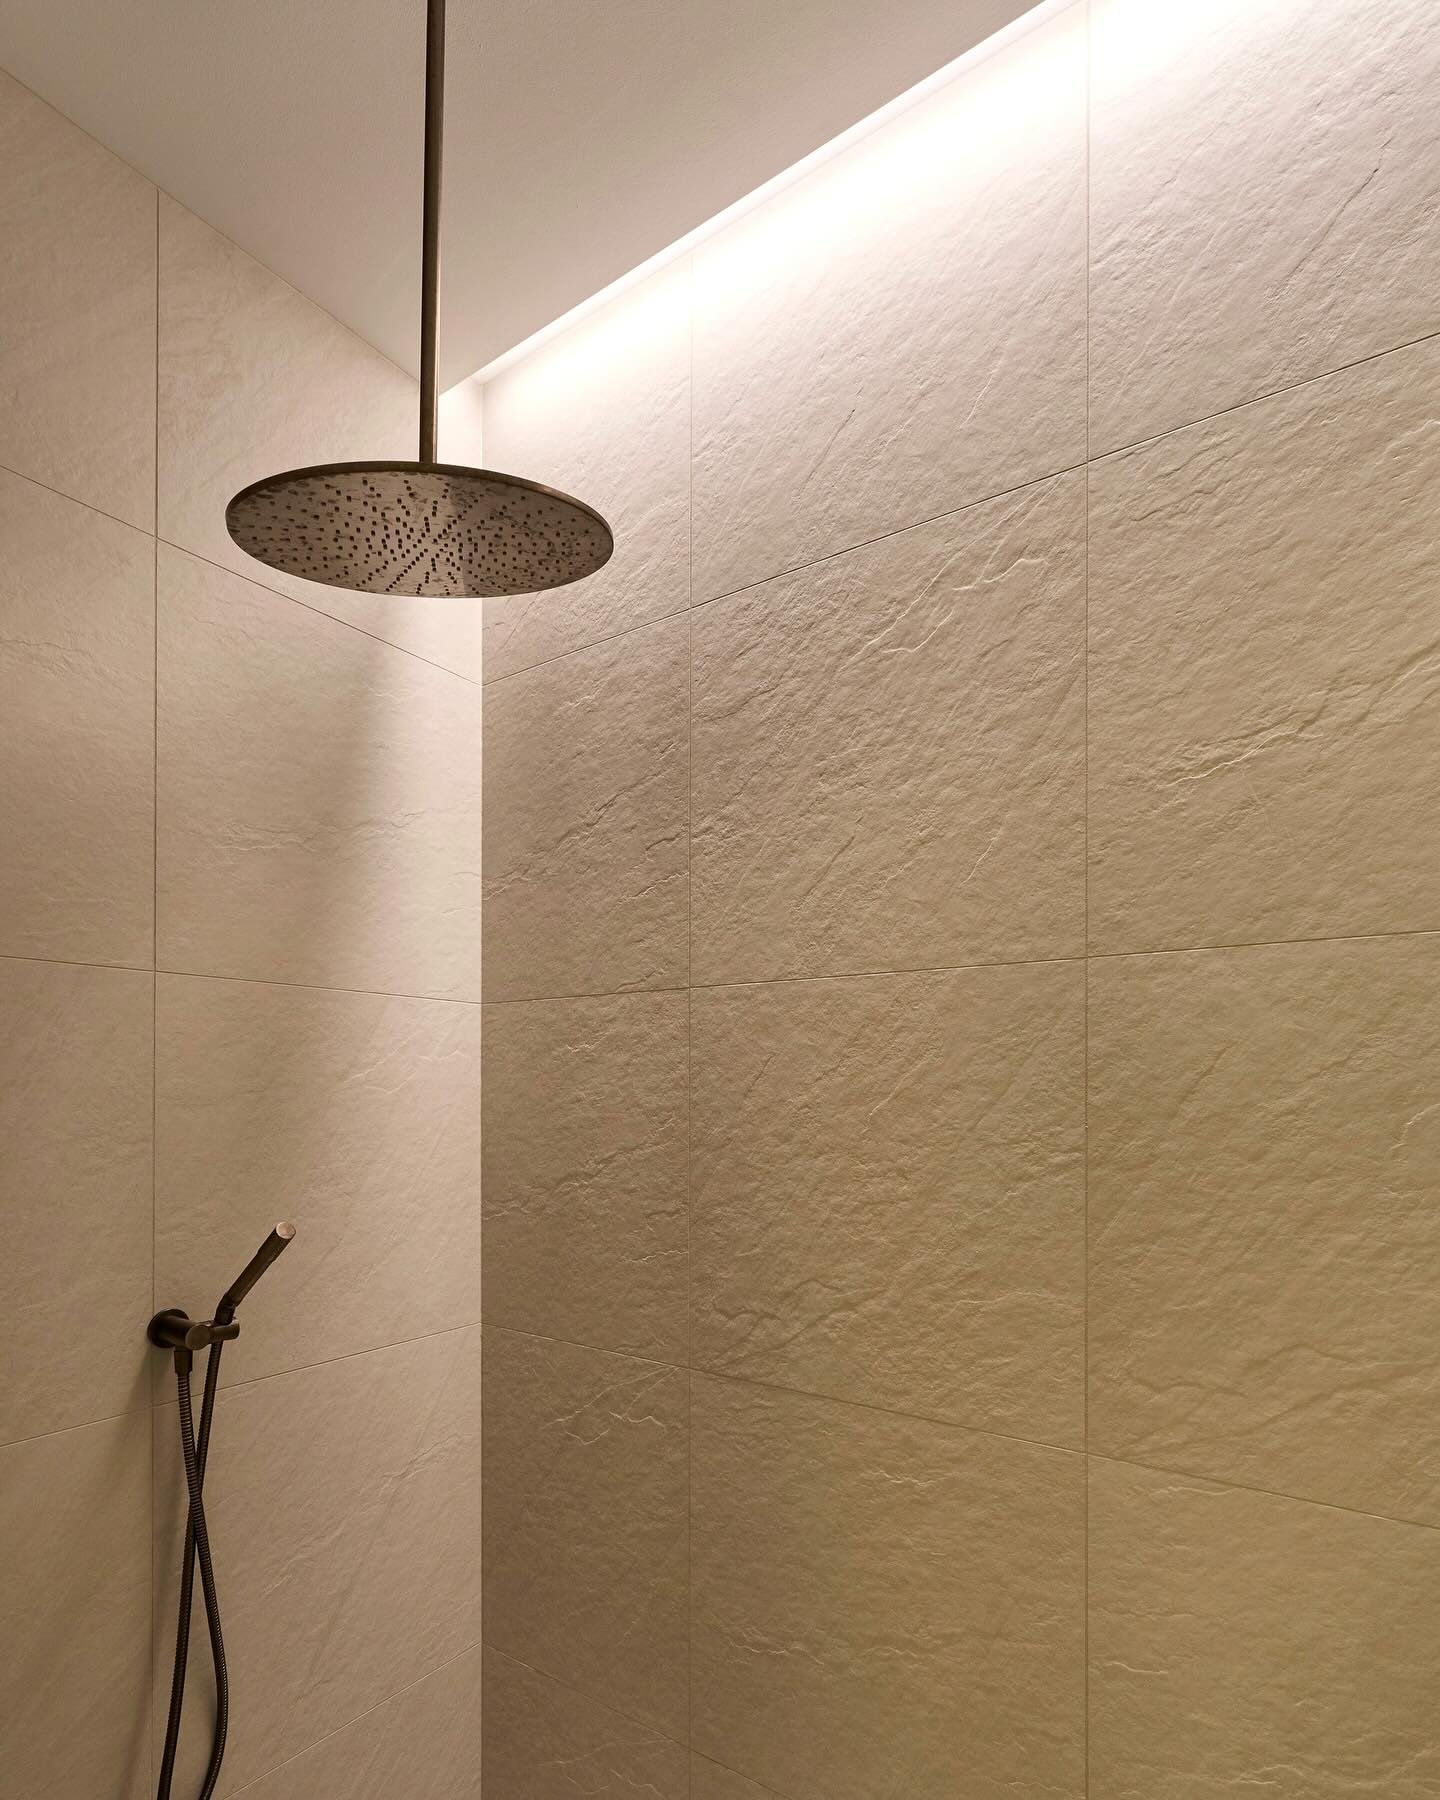 How much light do you need in the shower? 
Not nearly as much as you think!

With bathrooms becoming larger and more elaborate, proper lighting is essential to making the most of the space - so don&rsquo;t leave your light to chance, take the time to